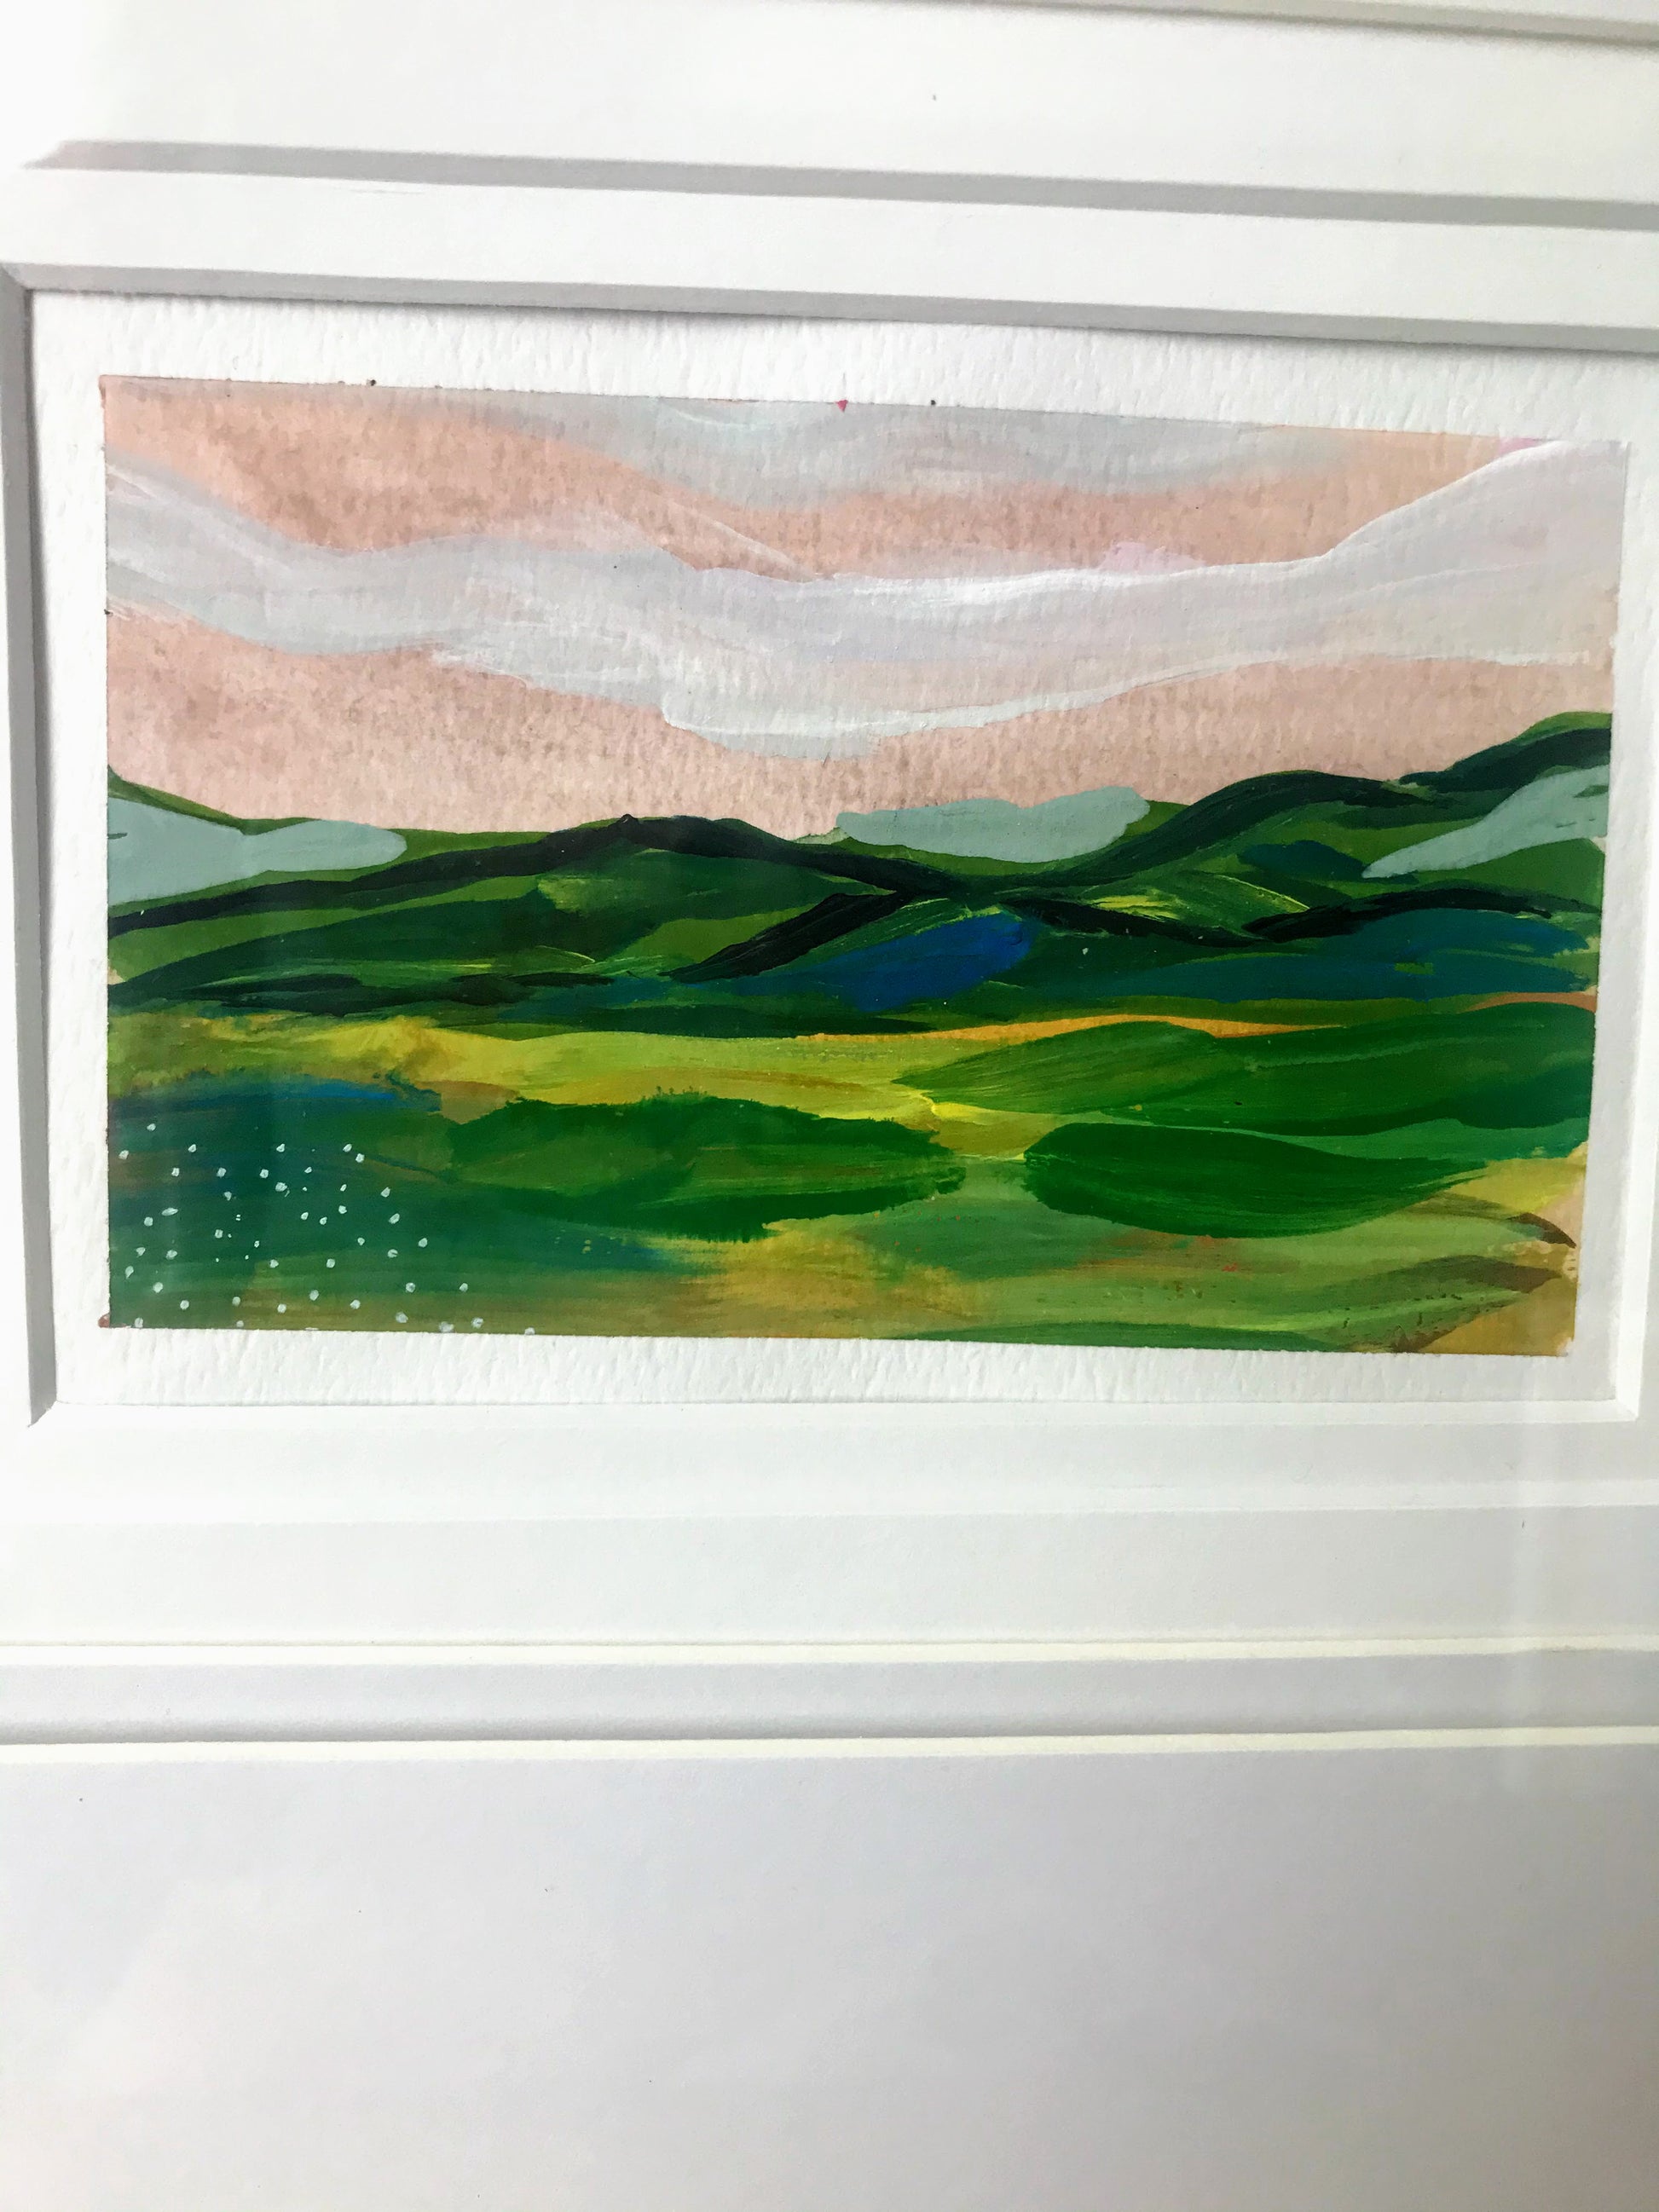 January 18, 2021 daily painting practice  5" x 4"  Mountain Landscape Painting in Salem, Virginia  gouache on paper  comes with the matting   frame is not included  free shipping  follow me on instagram or sign up for the emails to get the first look at the daily painting challenge.